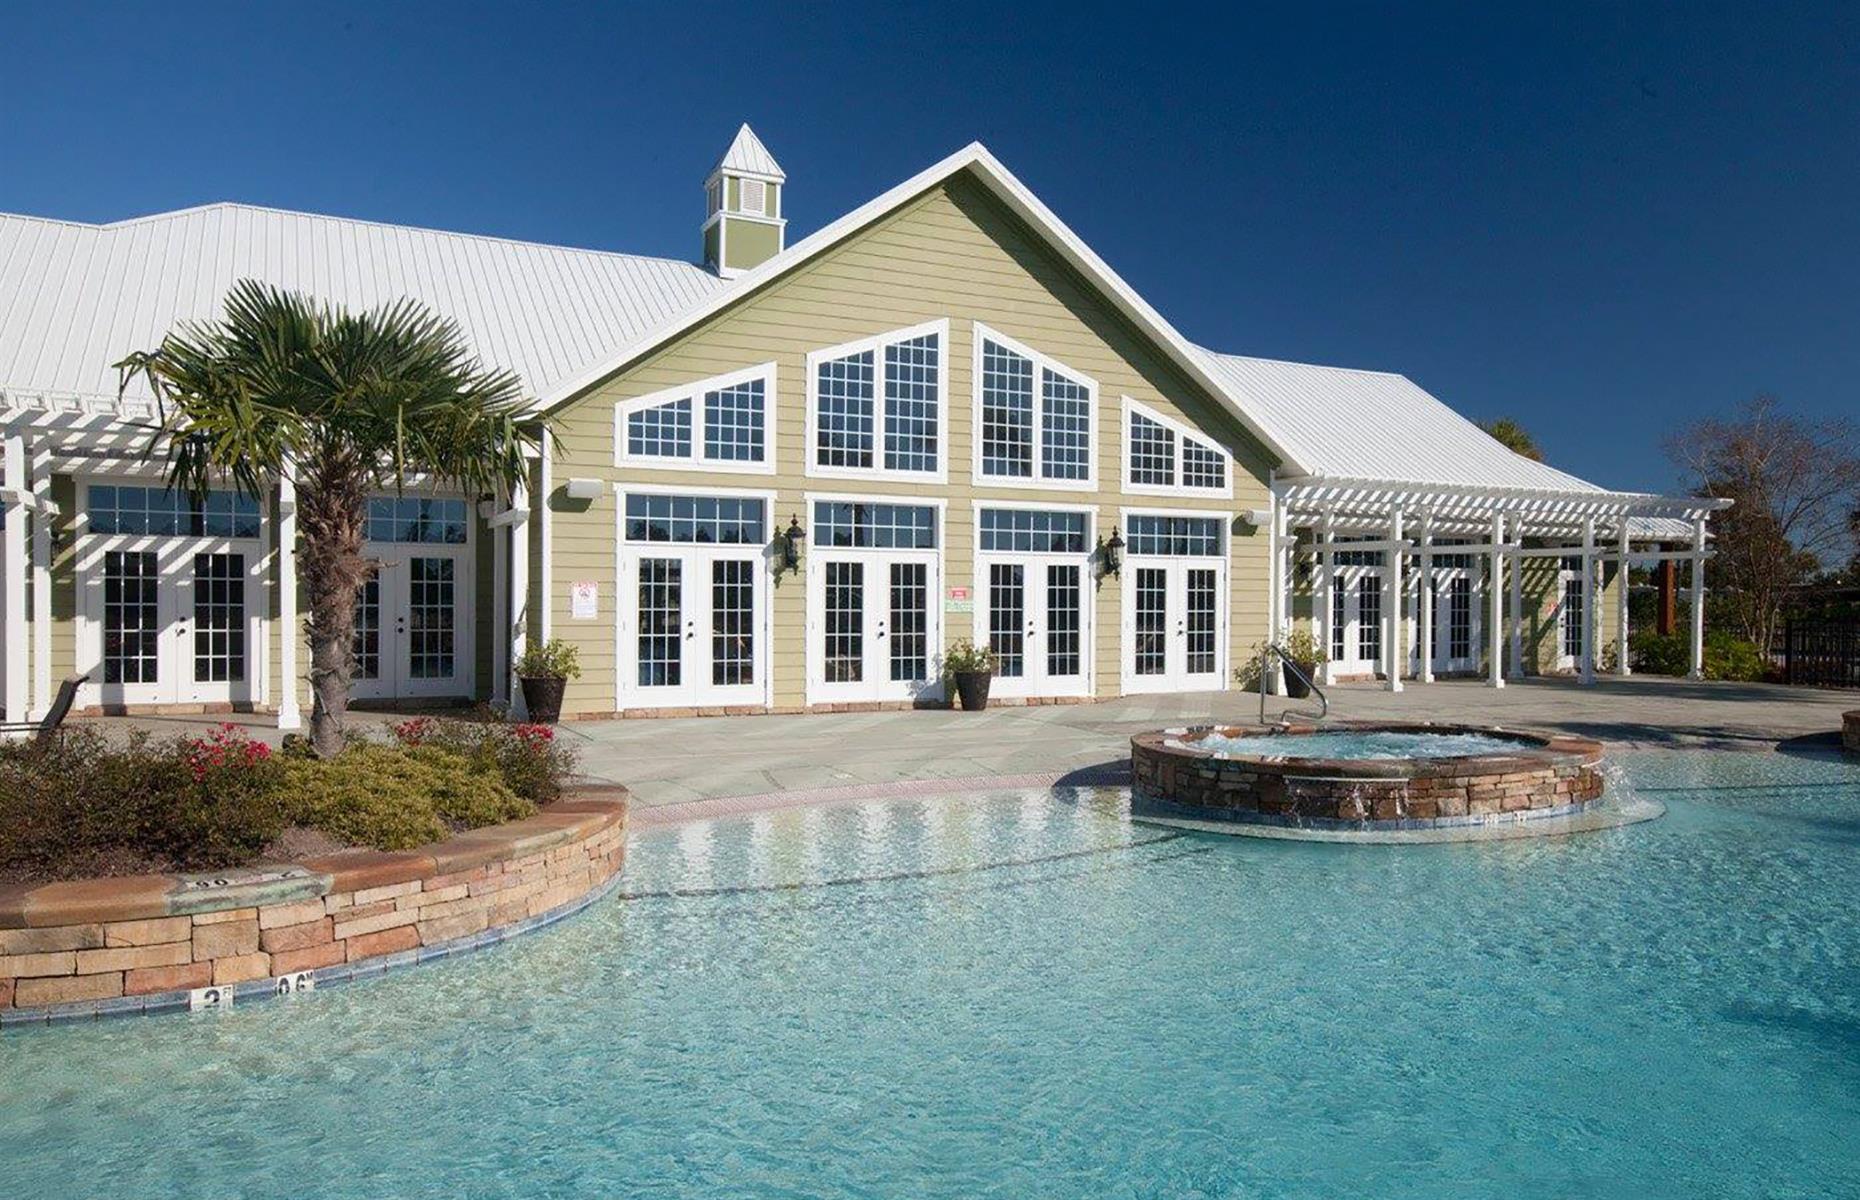 <p><a href="http://www.bellaterrarvresort.com/">This upscale resort</a> on the Gulf Coast isn't short on luxury. The park, in the pretty city of Foley, boasts spacious lots and lavish amenities including a swimming pool, hot tub, cinema and swish clubhouse (it's worth double-checking which communal facilities are available before your stay). The Gulf Coast's white-sand beaches are minutes away too. </p>